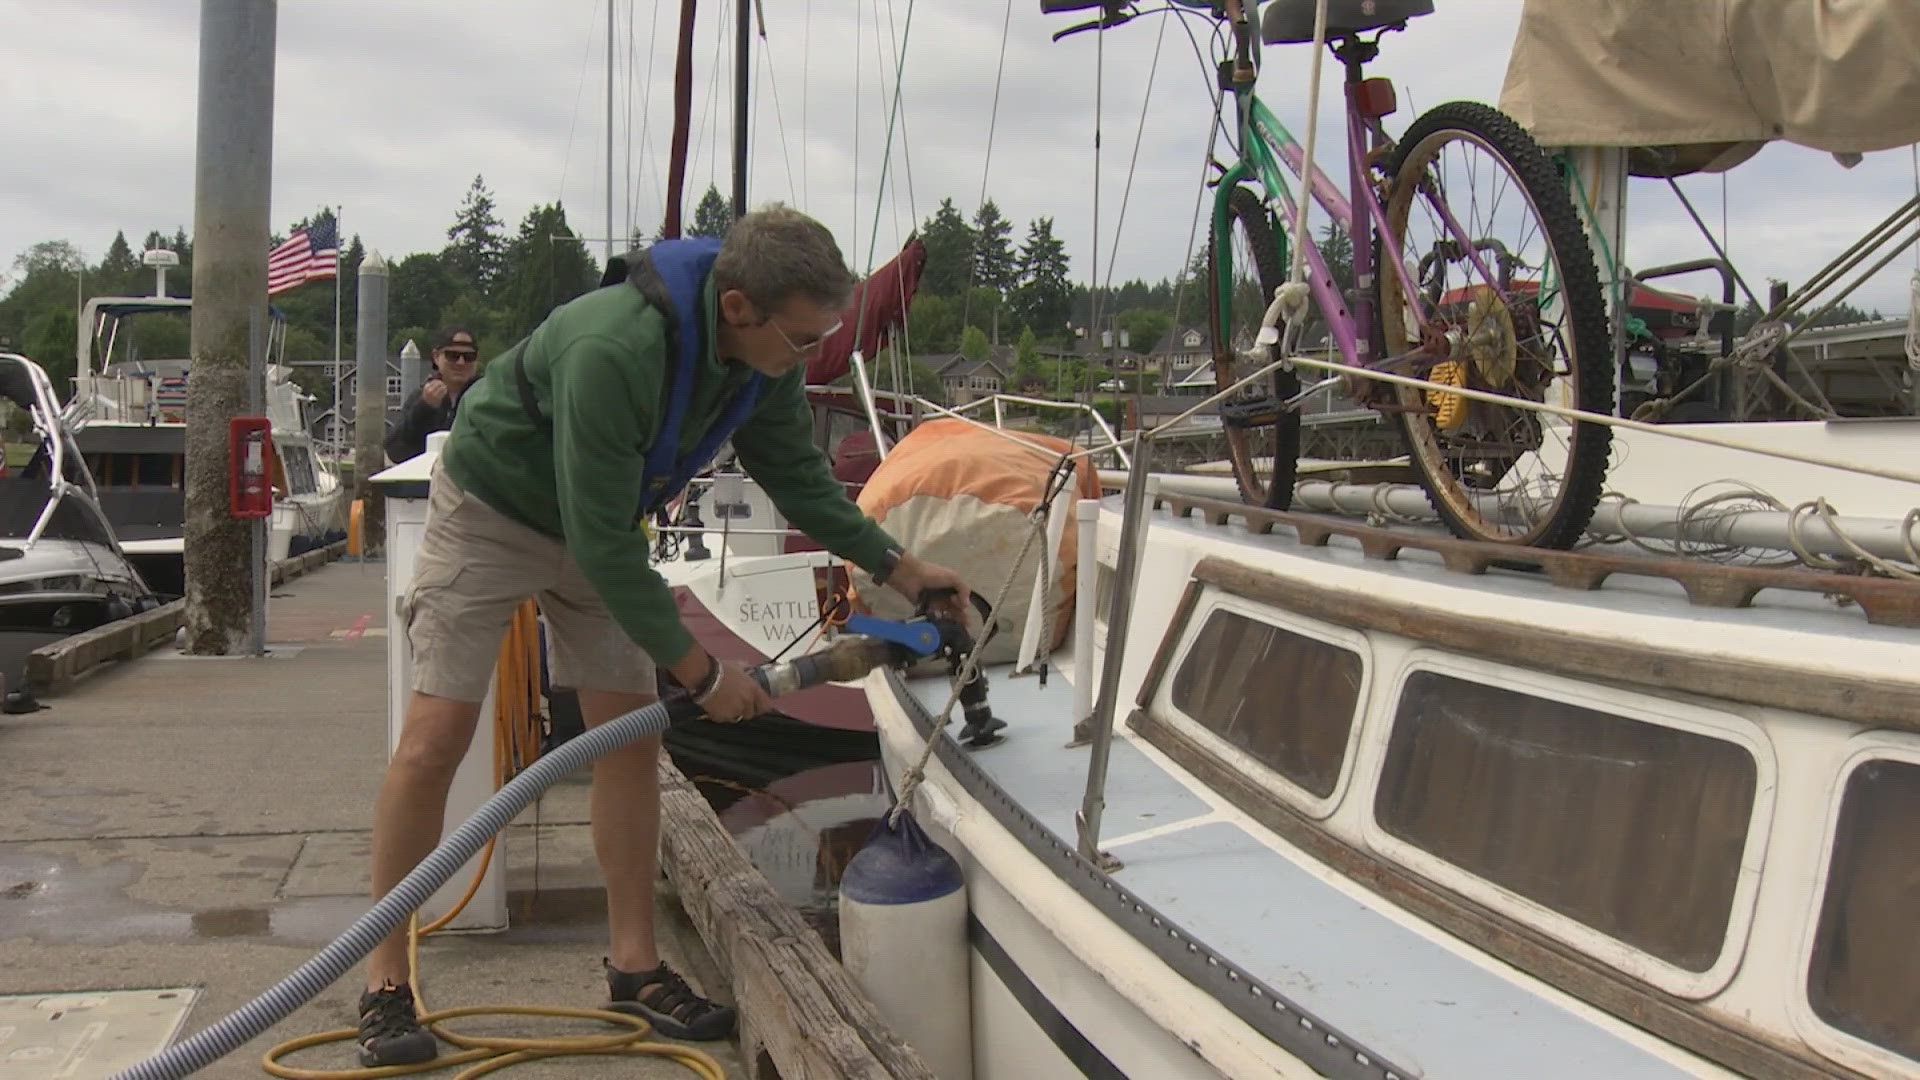 The free mobile service expects to pump 6,000 gallons of sewage off of boats in South Puget Sound by the 4th of July.